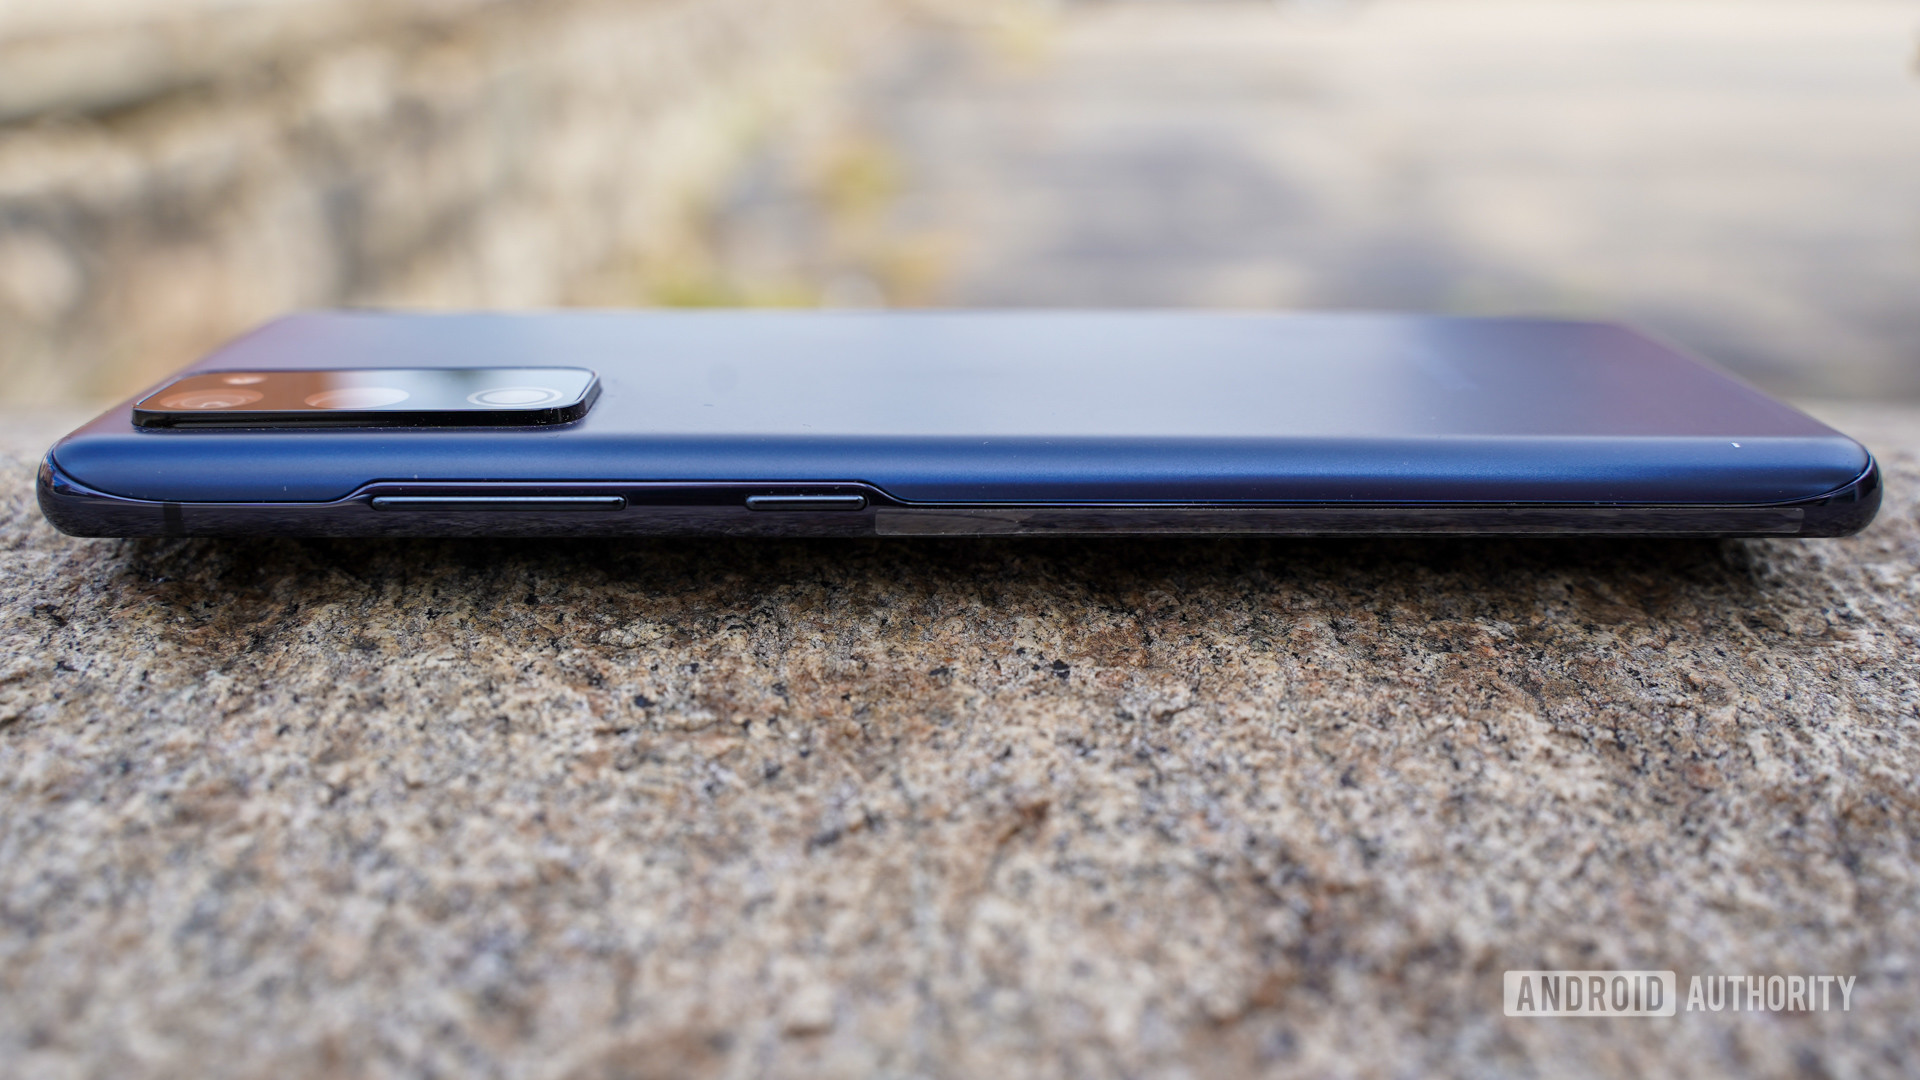 Samsung Galaxy S20 FE review second opinion: Almost a OnePlus killer